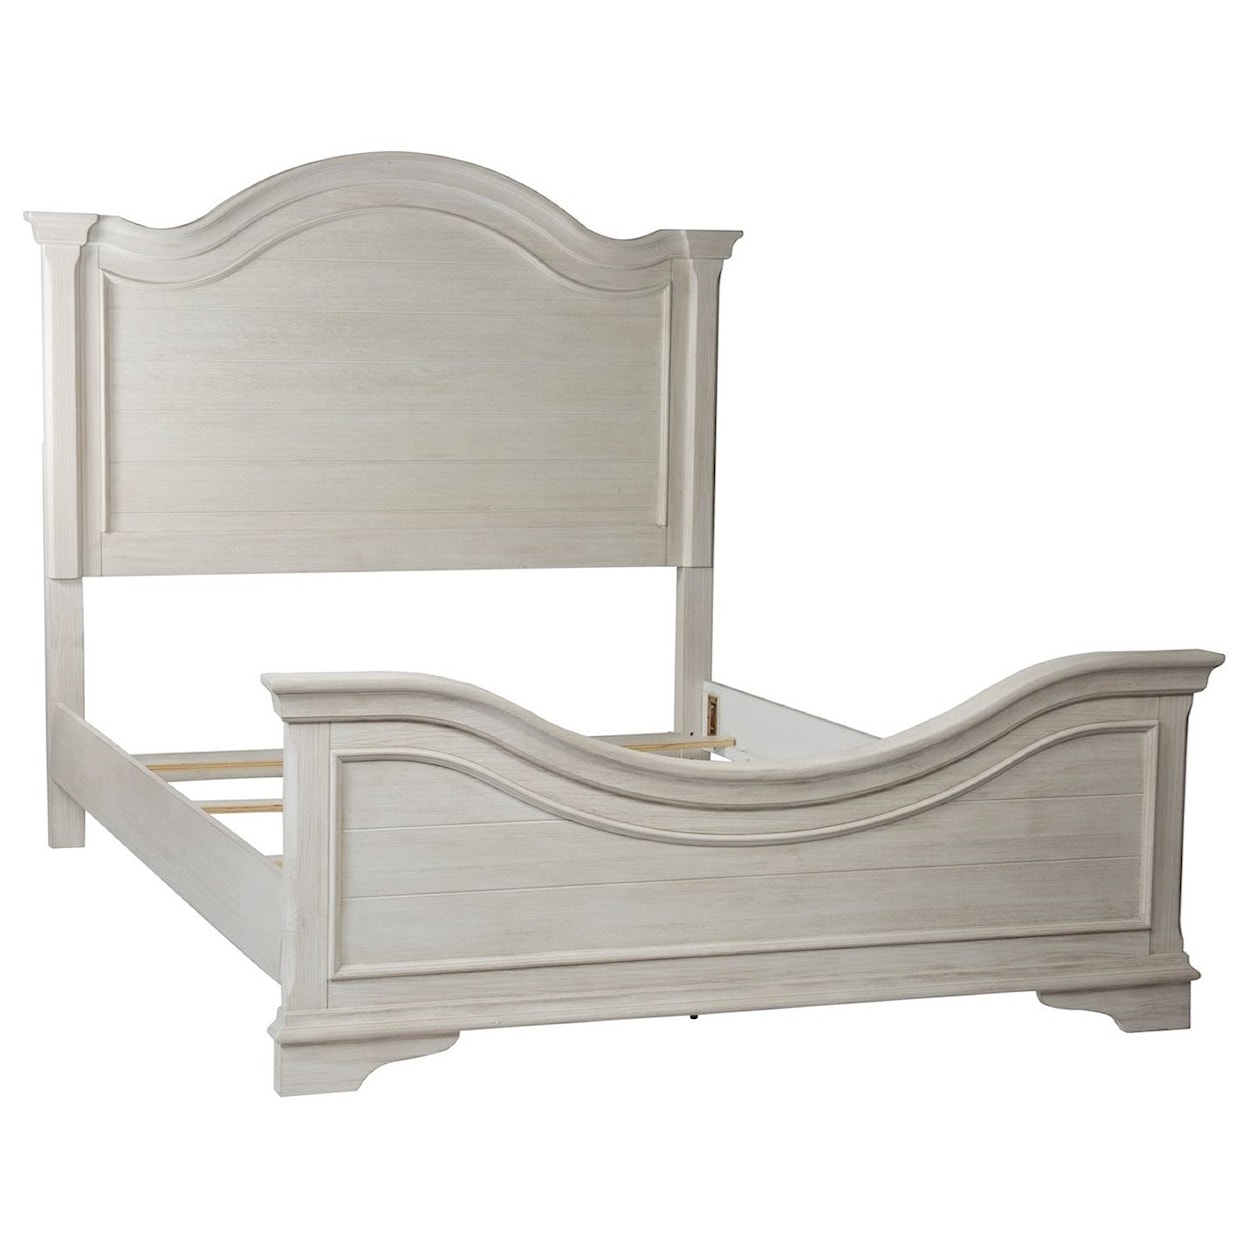 Libby Bayside Bedroom King Panel Bed